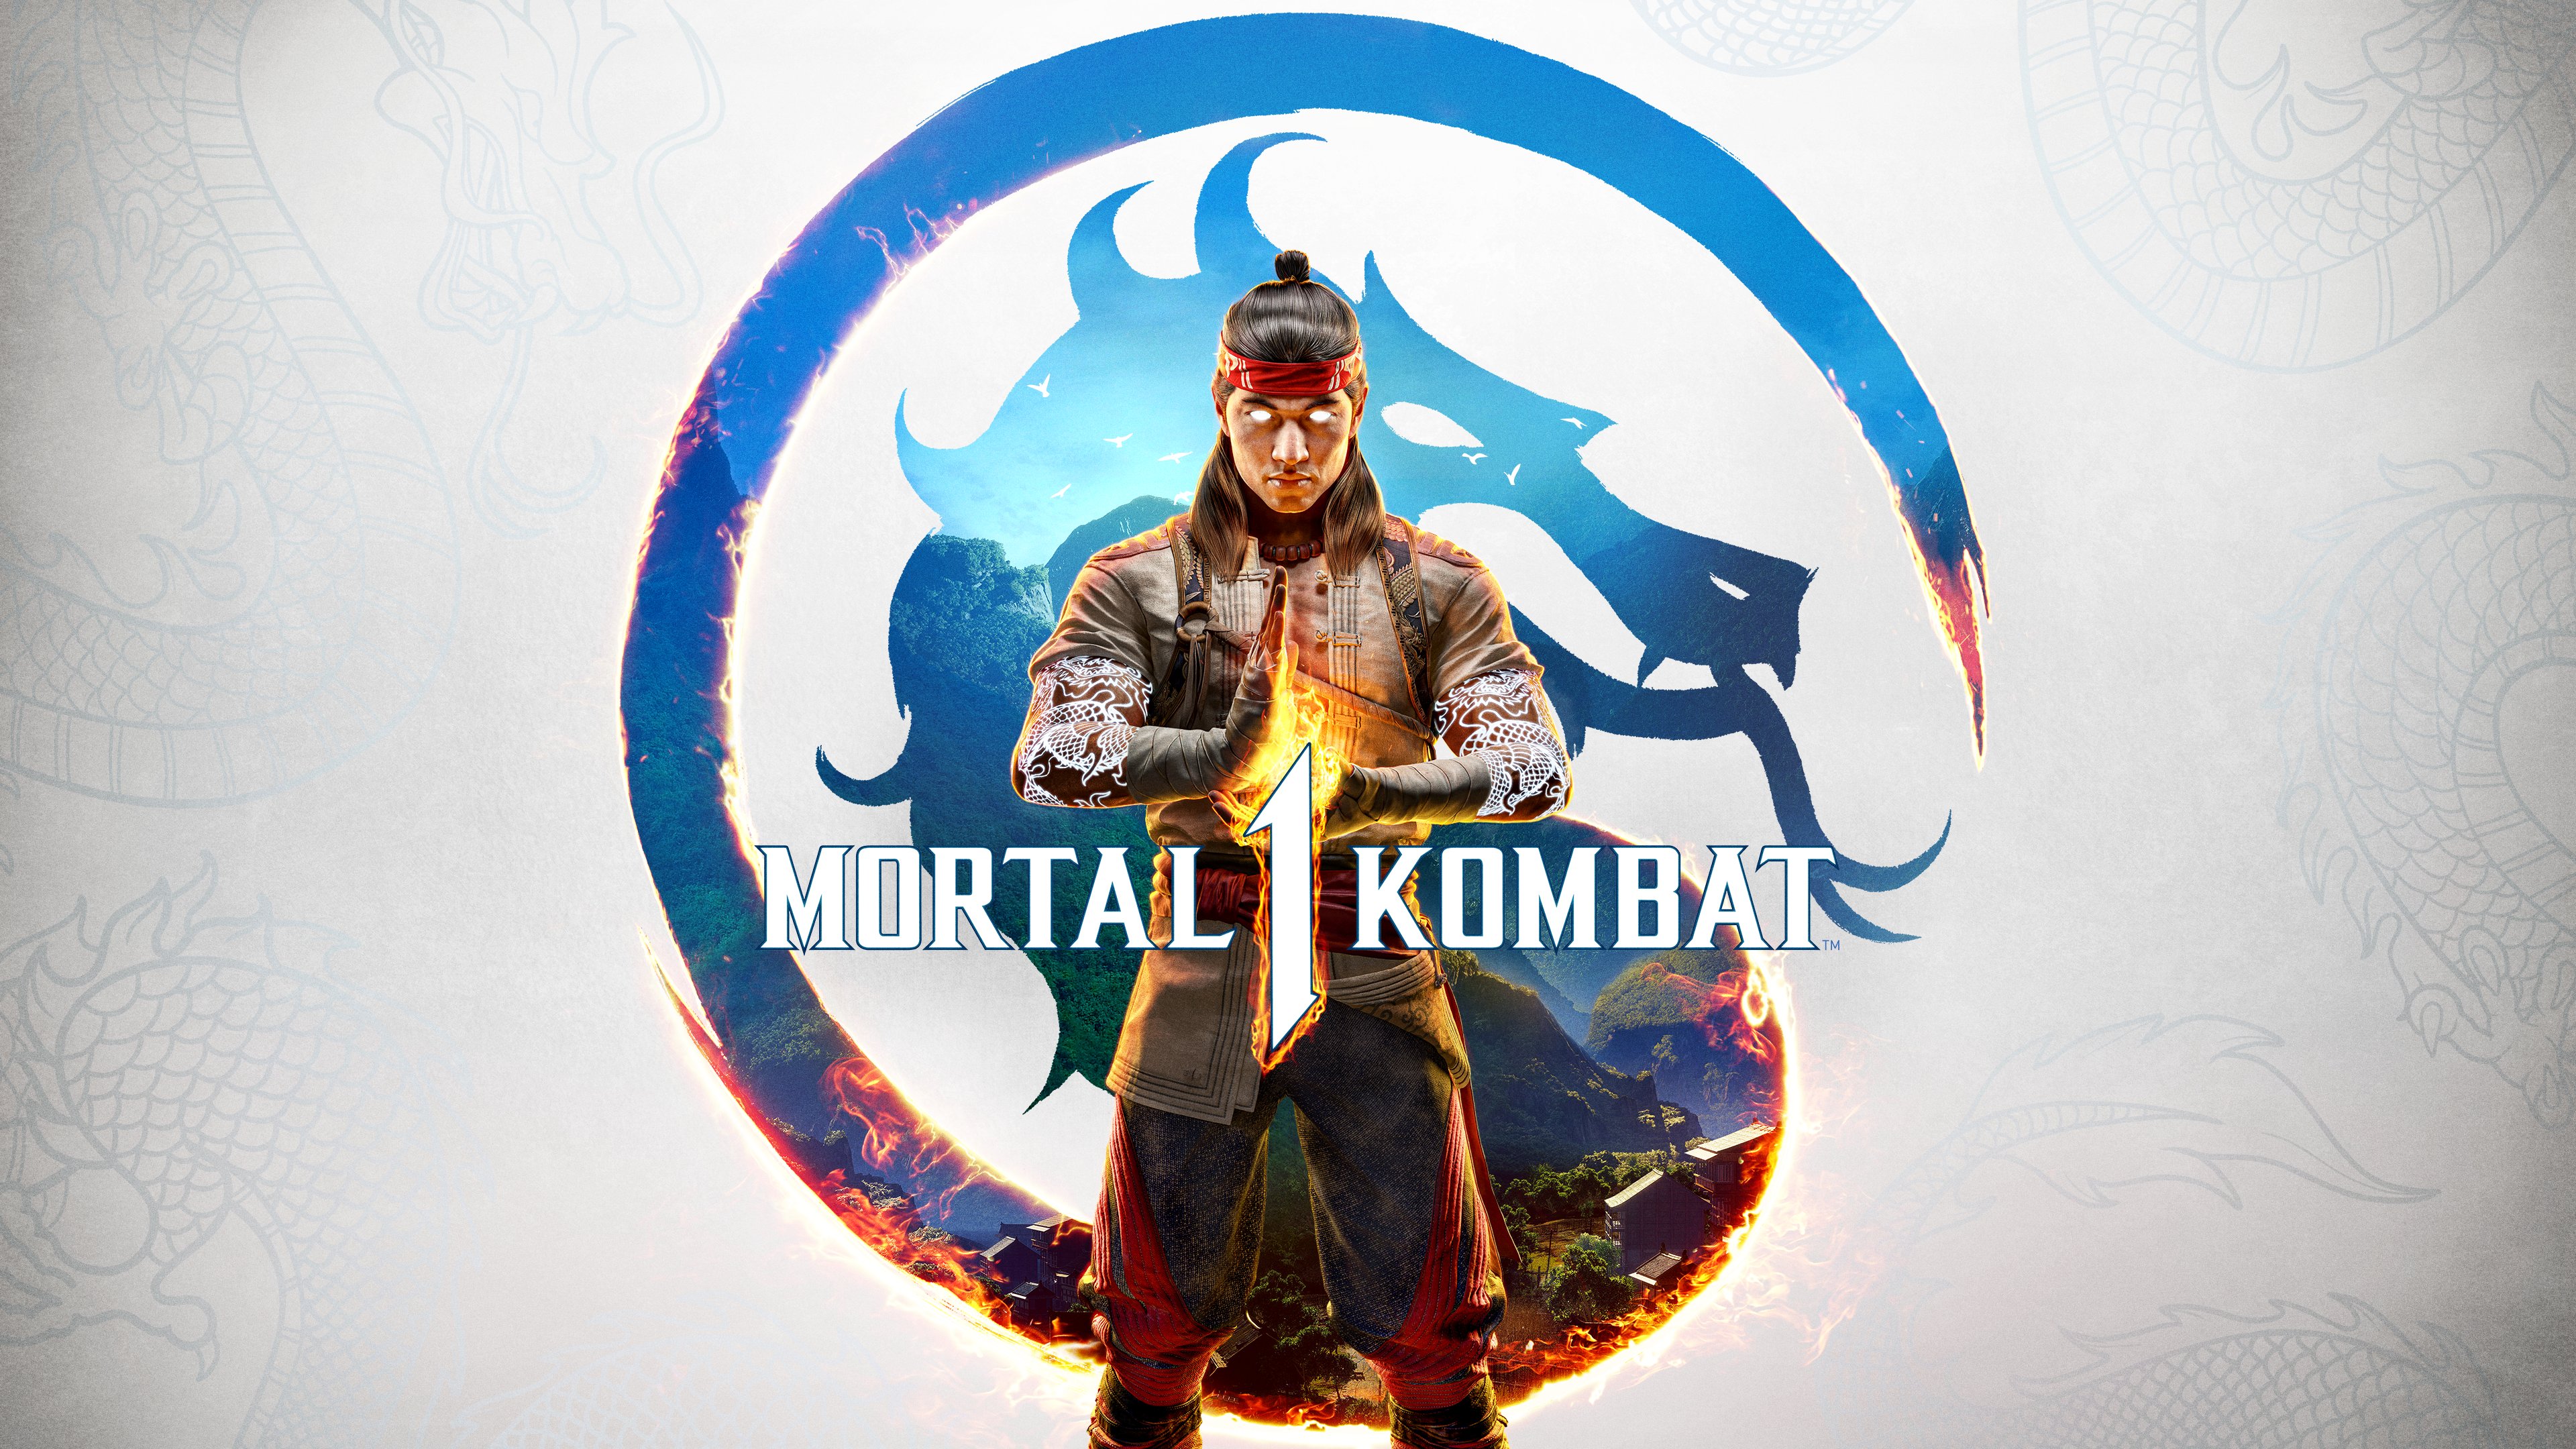 Mortal Kombat 1 Character renders compared to the their last